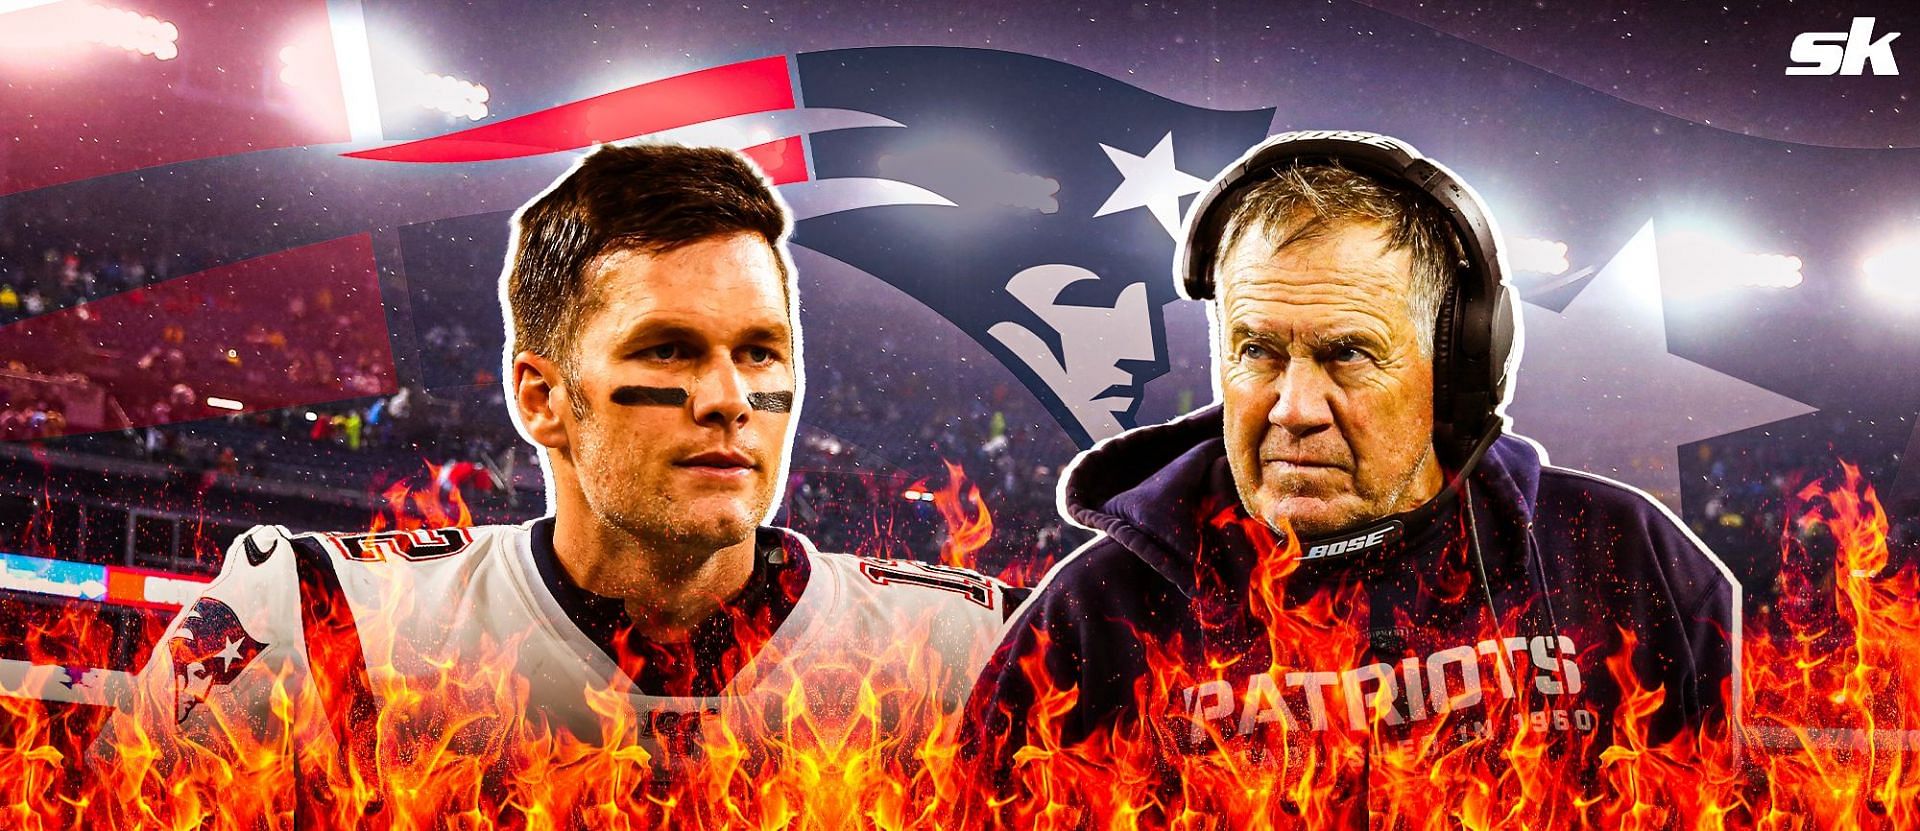 om Brady hints at Bill Belichick being primary reason for controversial Patriots exit